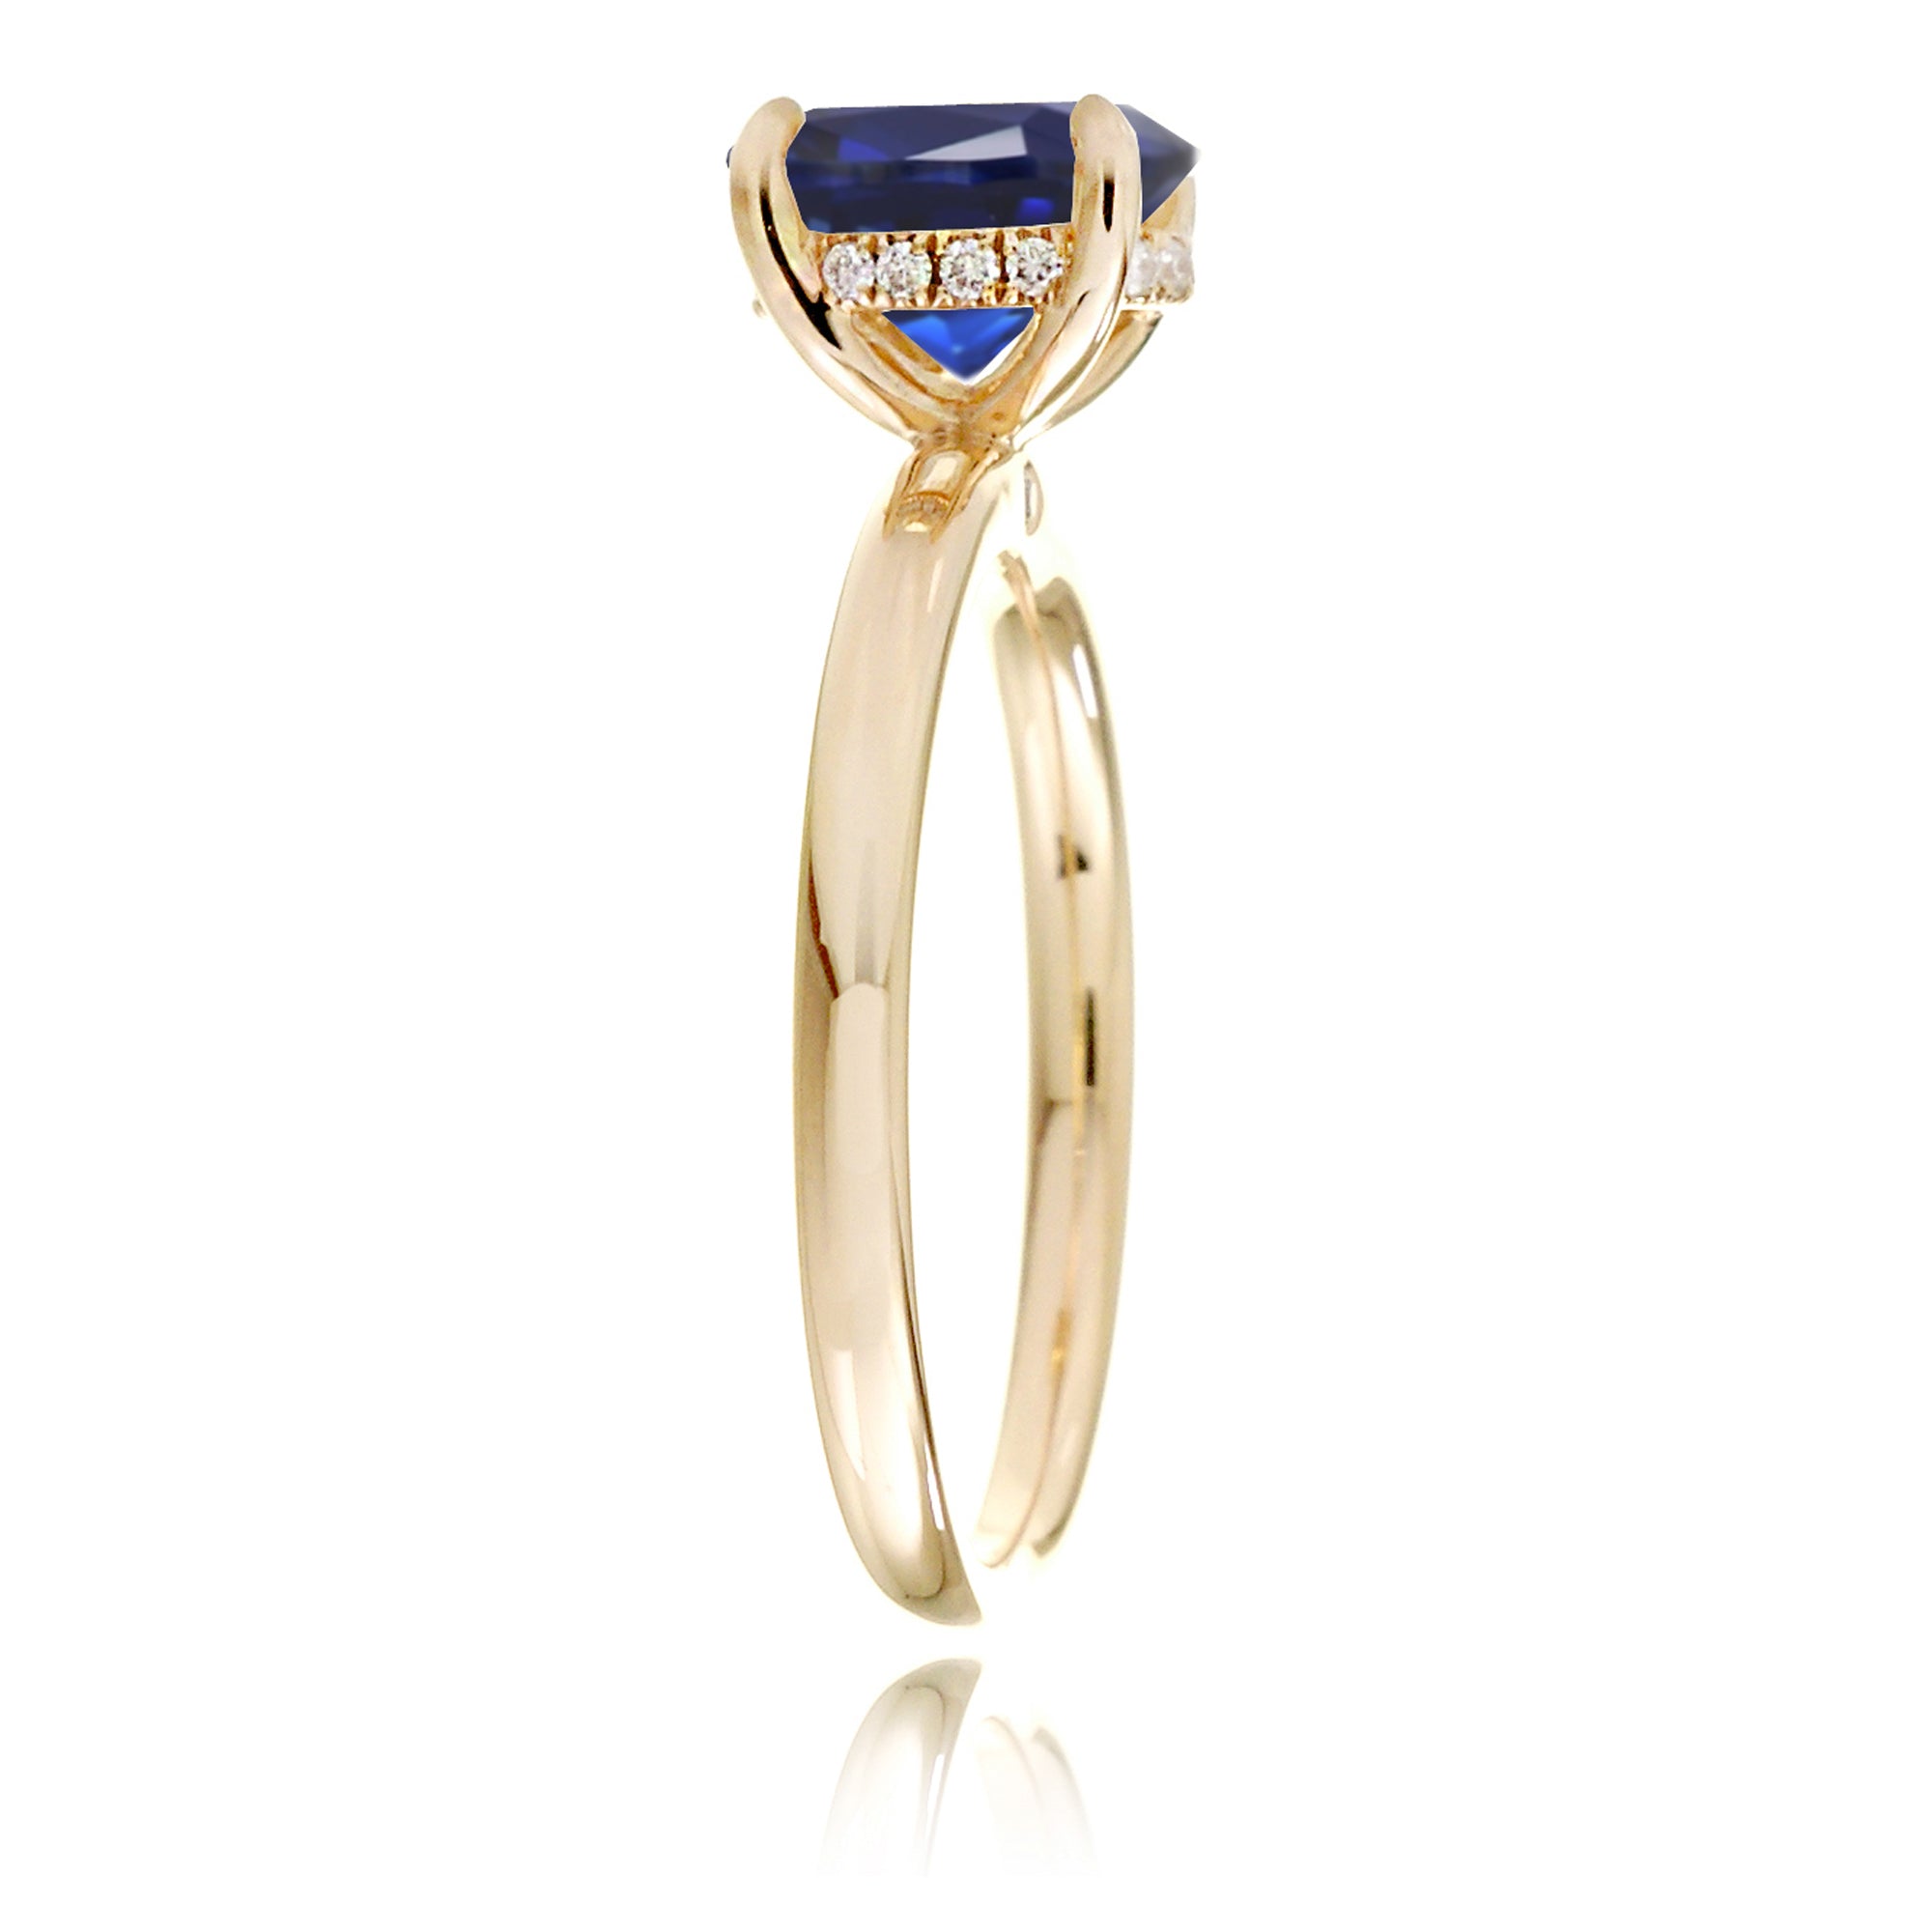 Oval cut blue sapphire engagement ring with a diamond hidden halo and solid band yellow gold